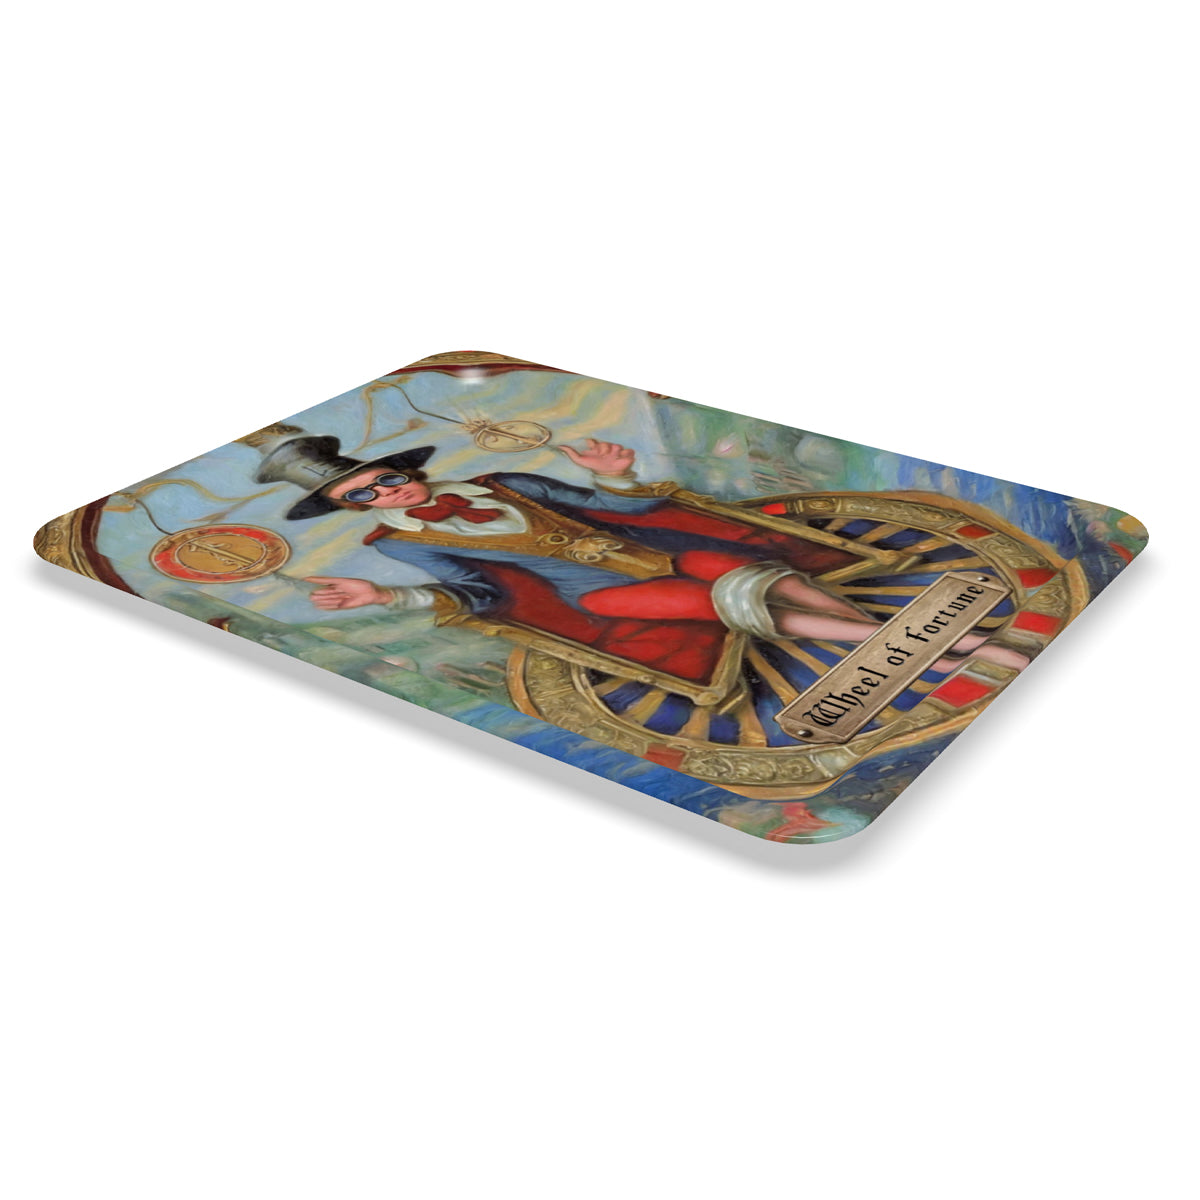 TAROT - "Wheel of Fortune" Serving Tray